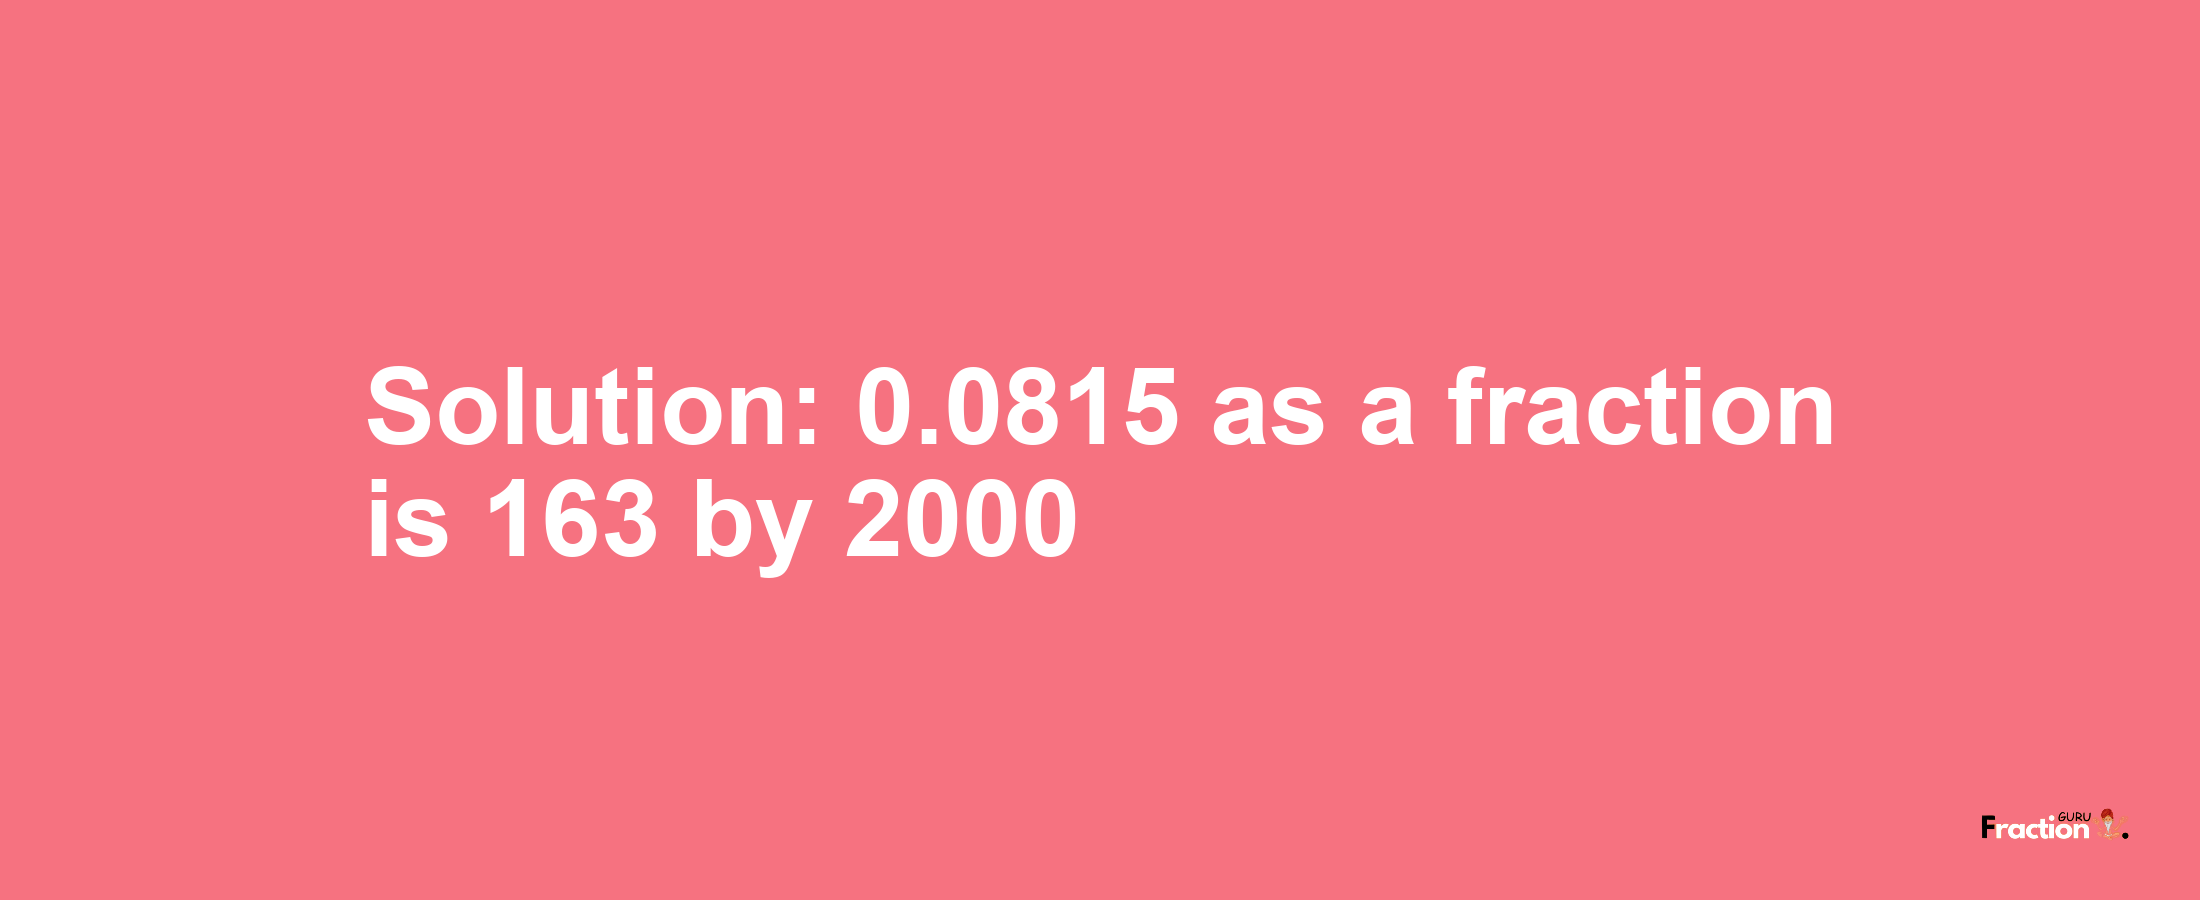 Solution:0.0815 as a fraction is 163/2000